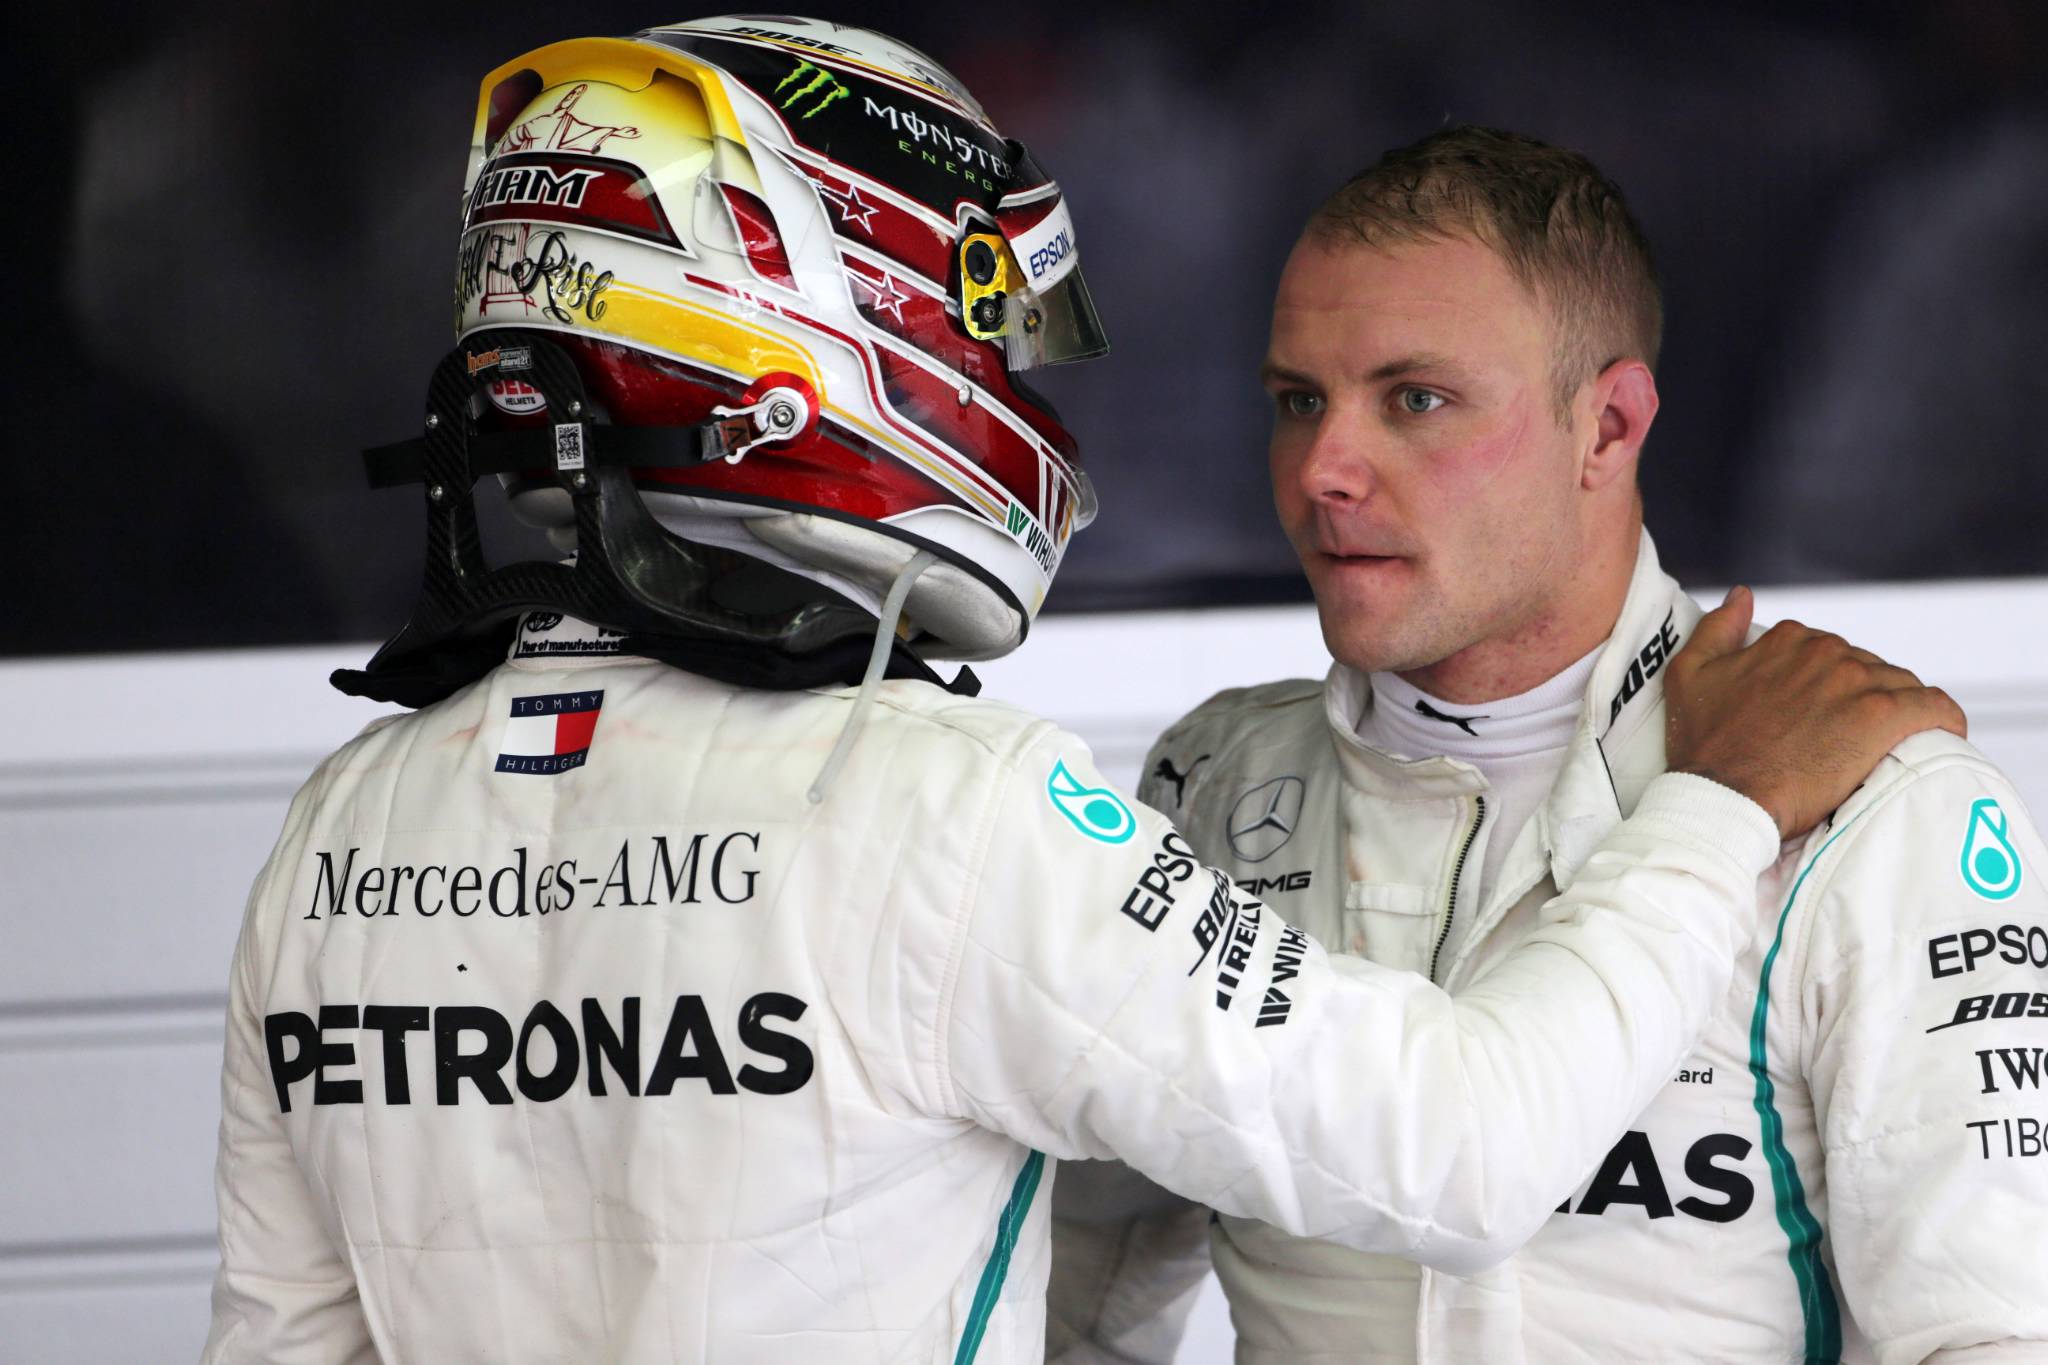 30.09.2018 - Race, Lewis Hamilton (GBR) Mercedes AMG F1 W09 race winner and 2nd place Valtteri Bottas (FIN) Mercedes AMG F1 W09